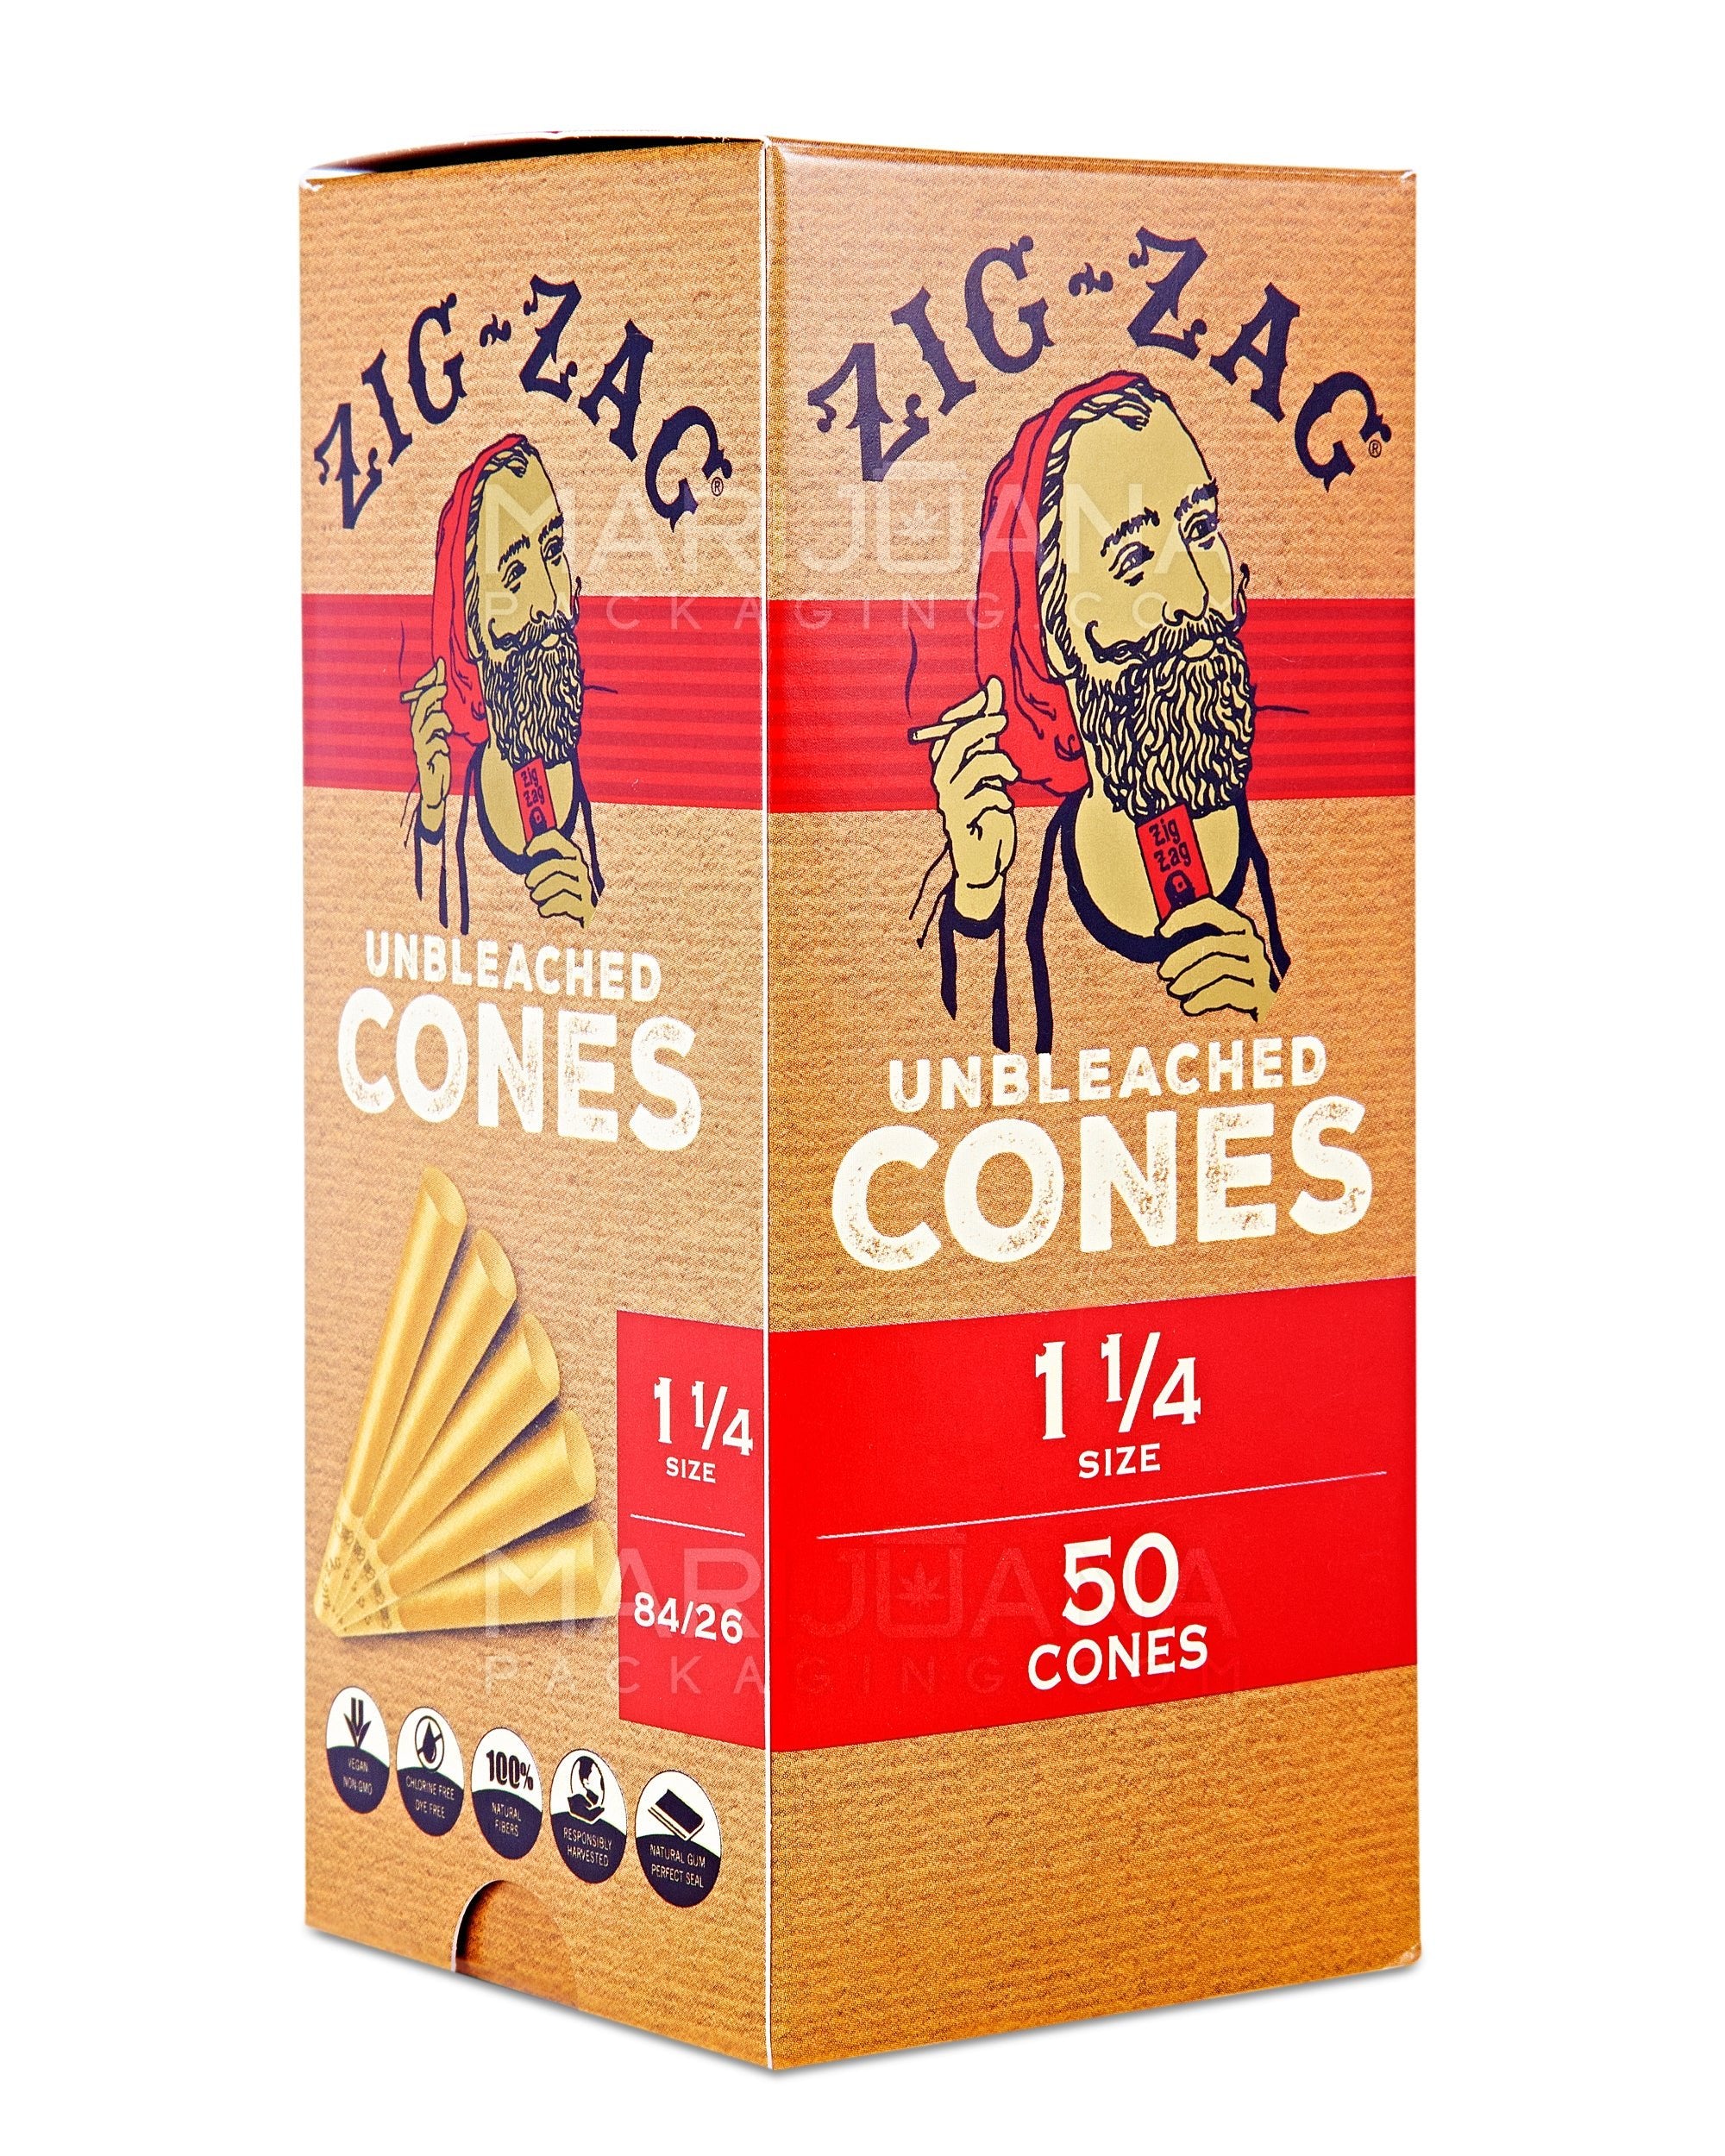 ZIG ZAG | 1 1/4 Size Pre-Rolled Cones | 84mm - Unbleached Paper - 50 Count - 1